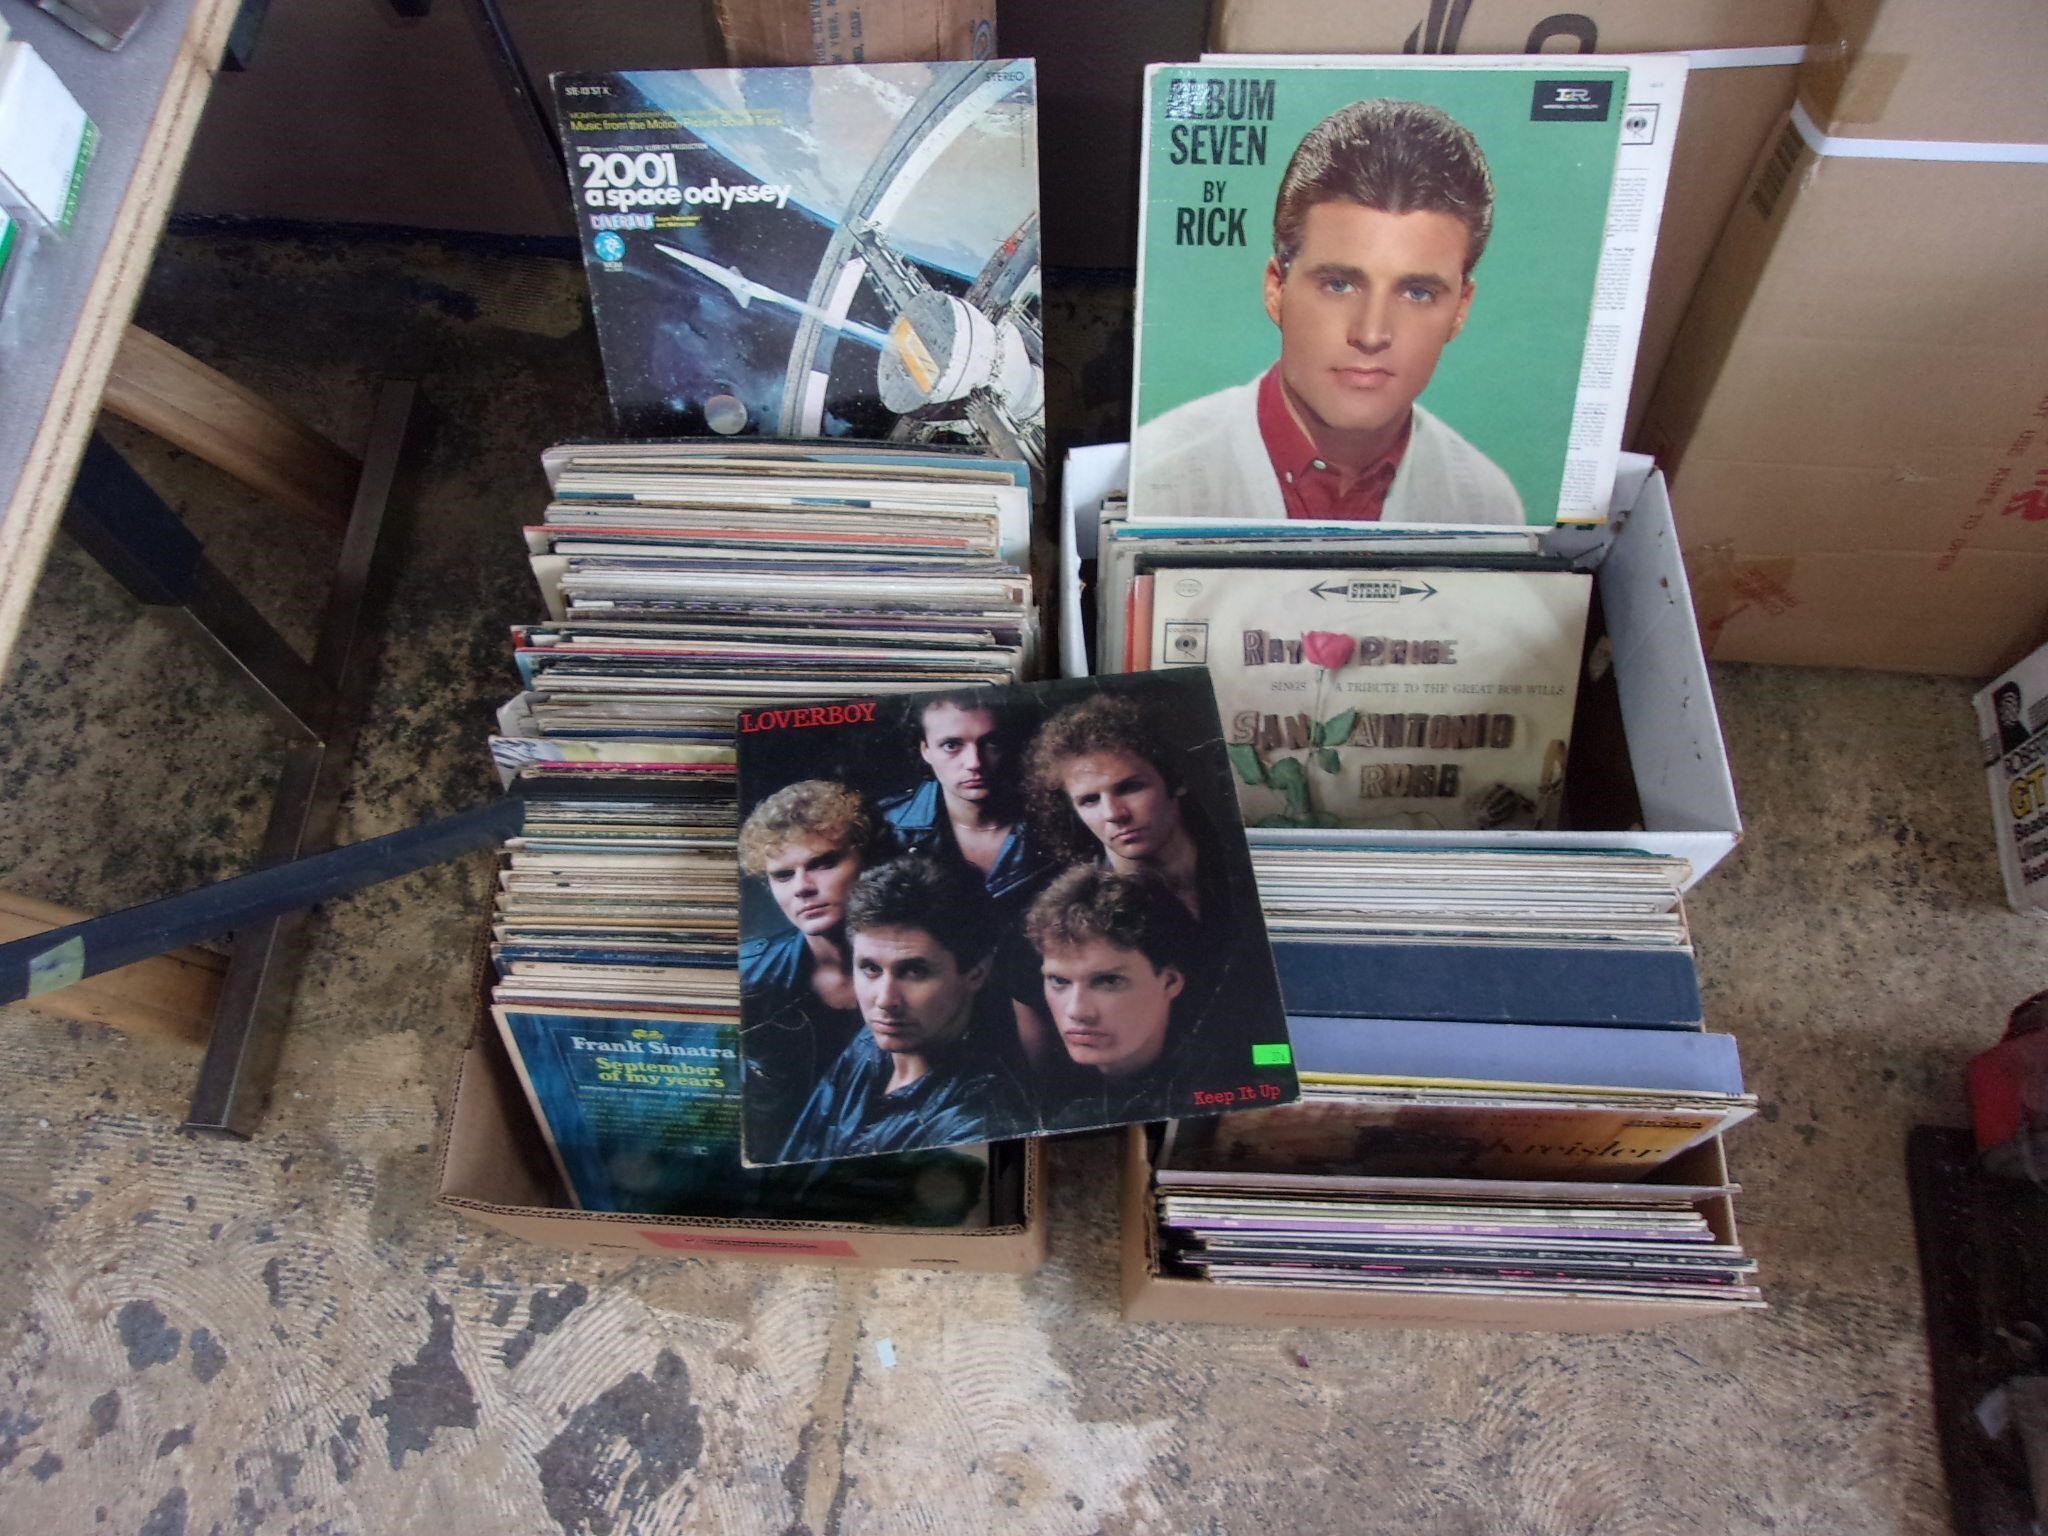 records and empty sleeves etc lot